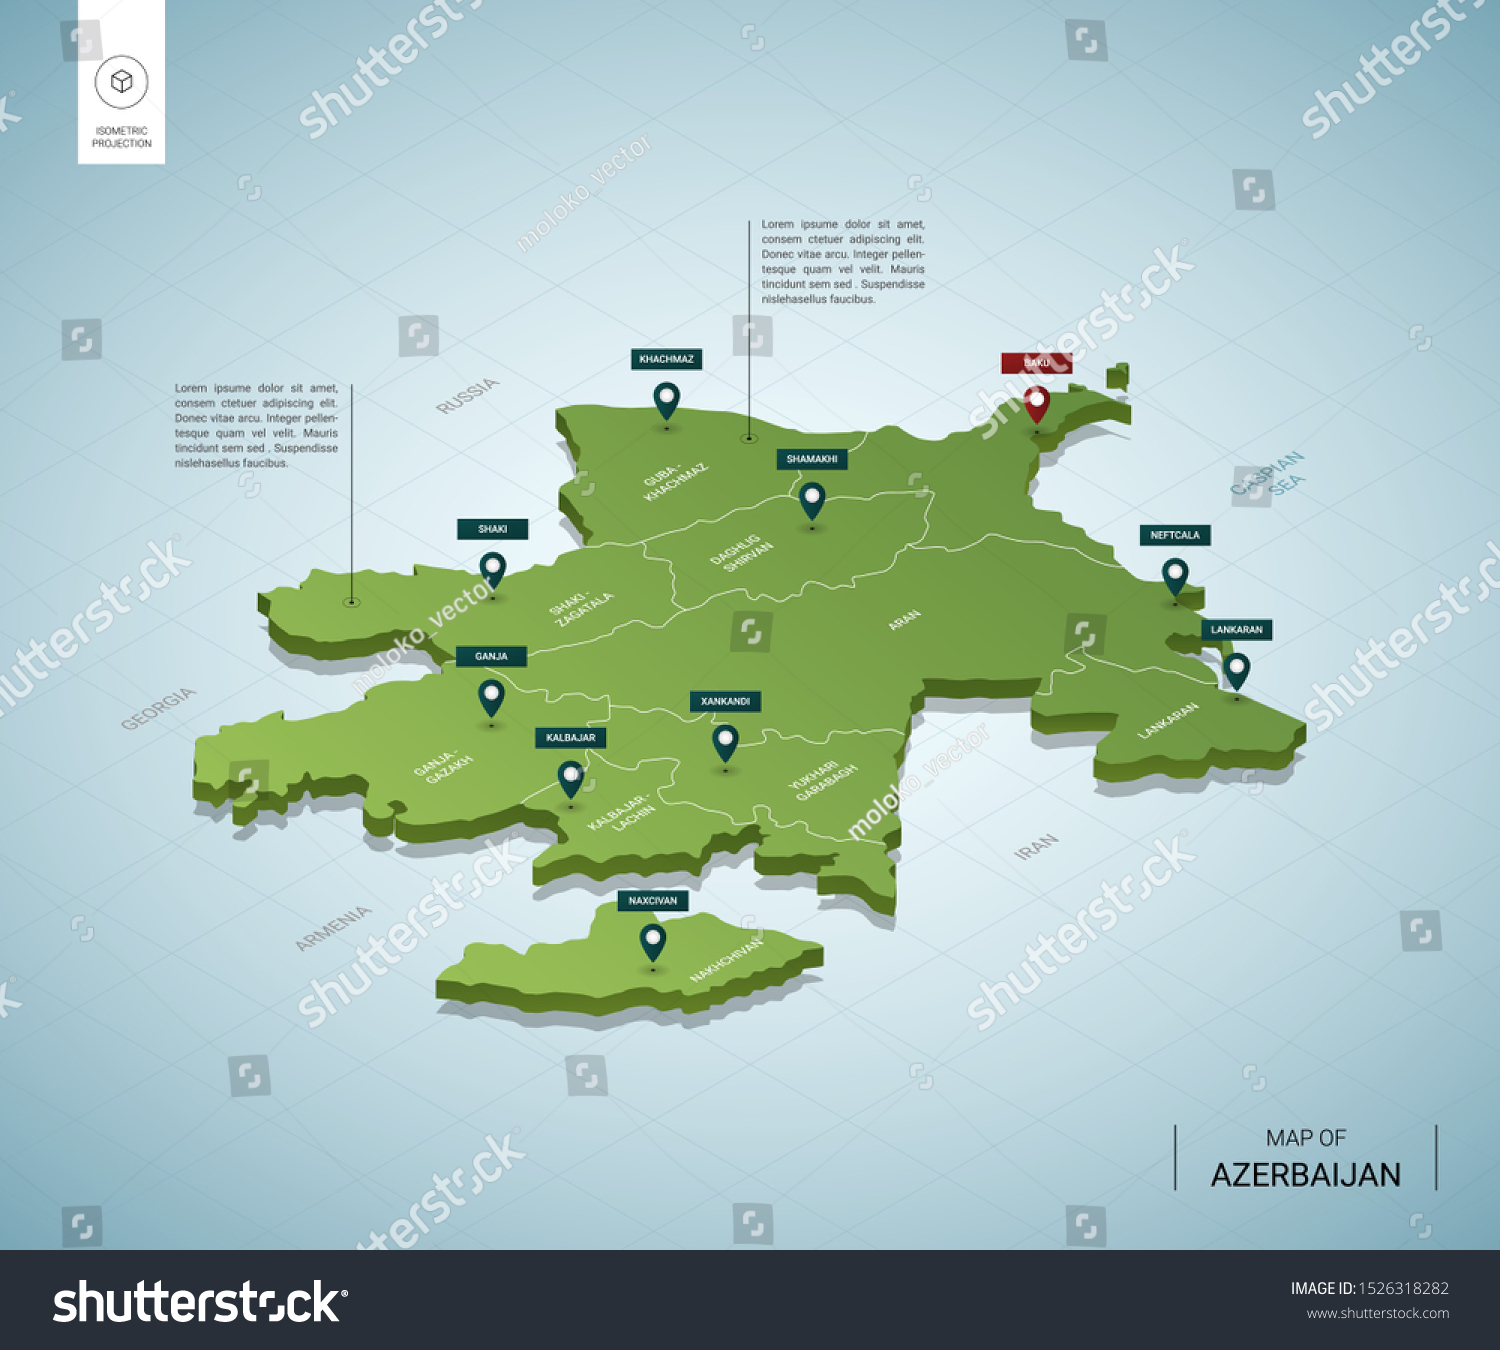 SVG of Stylized map of Azerbaijan. Isometric 3D green map with cities, borders, capital Baku, regions, shadow.; Vector illustration. Editable layers clearly labeled.  svg